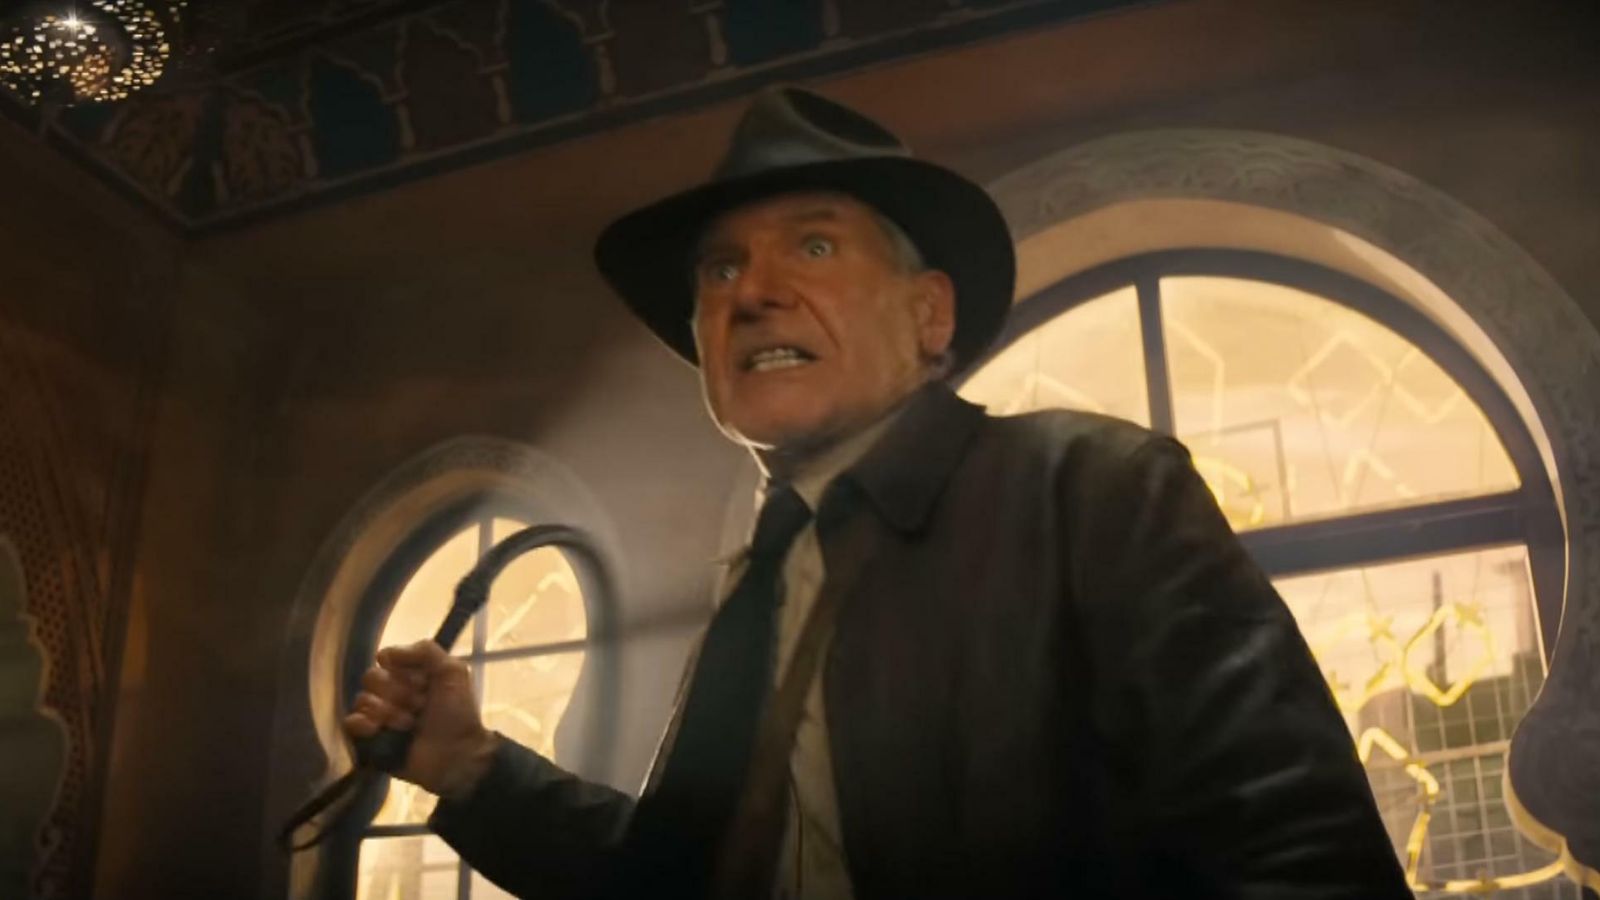 Indiana Jones And The Dial Of Destiny: First trailer revealed as Harrison Ford returns for fifth film